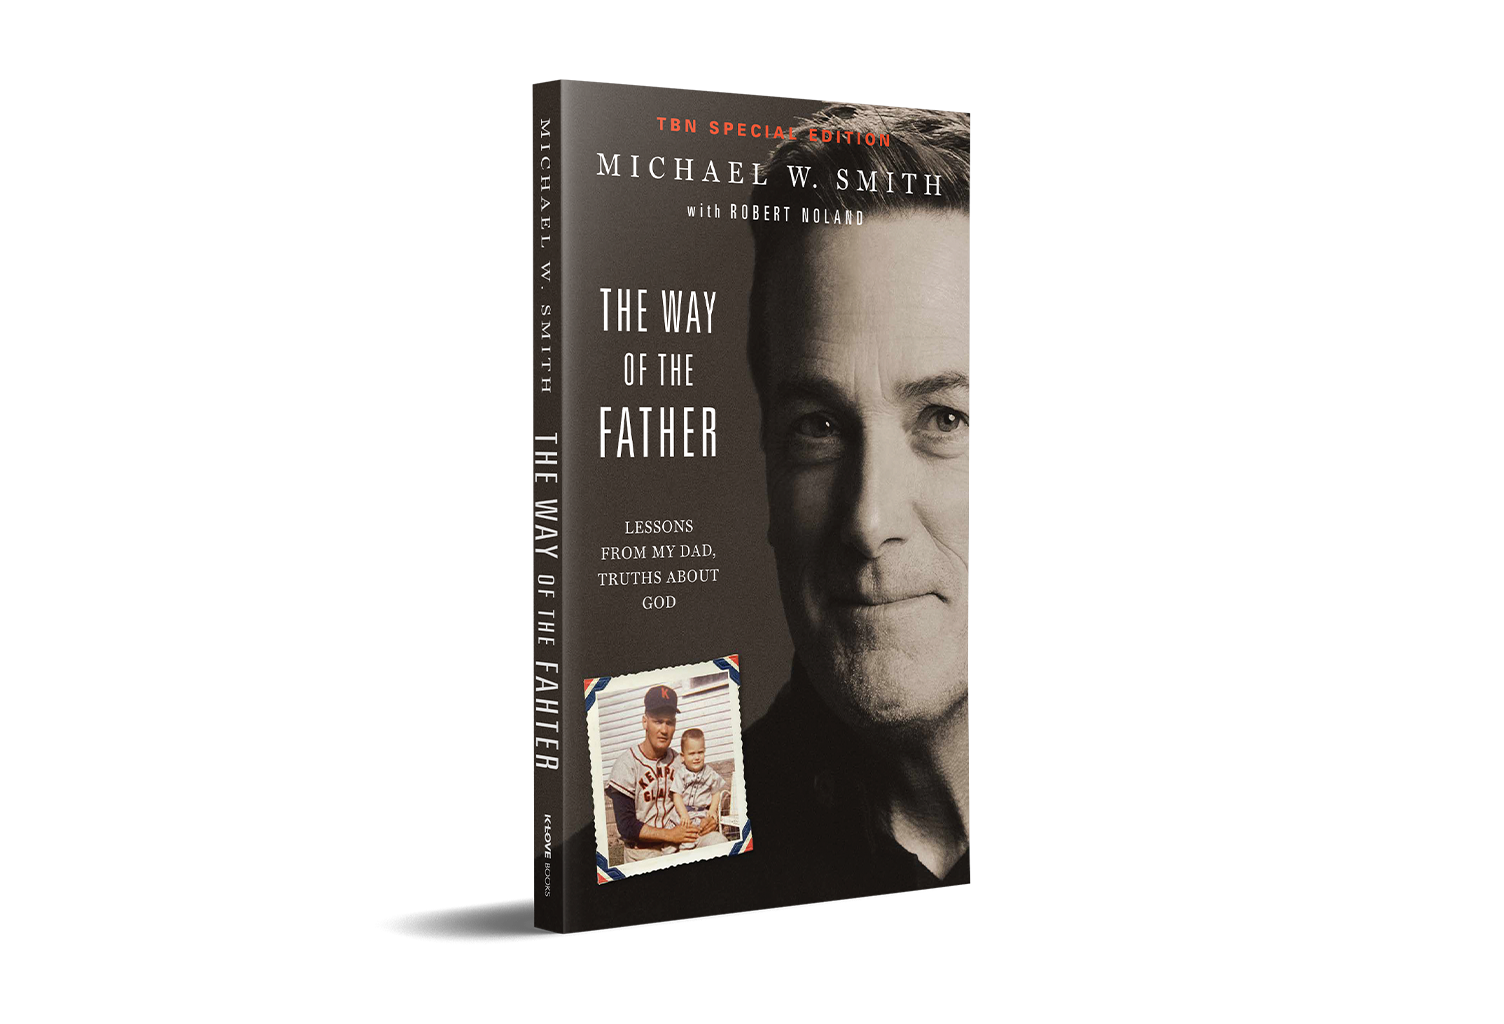 The Way of the Father by Michael W. Smith on TBN